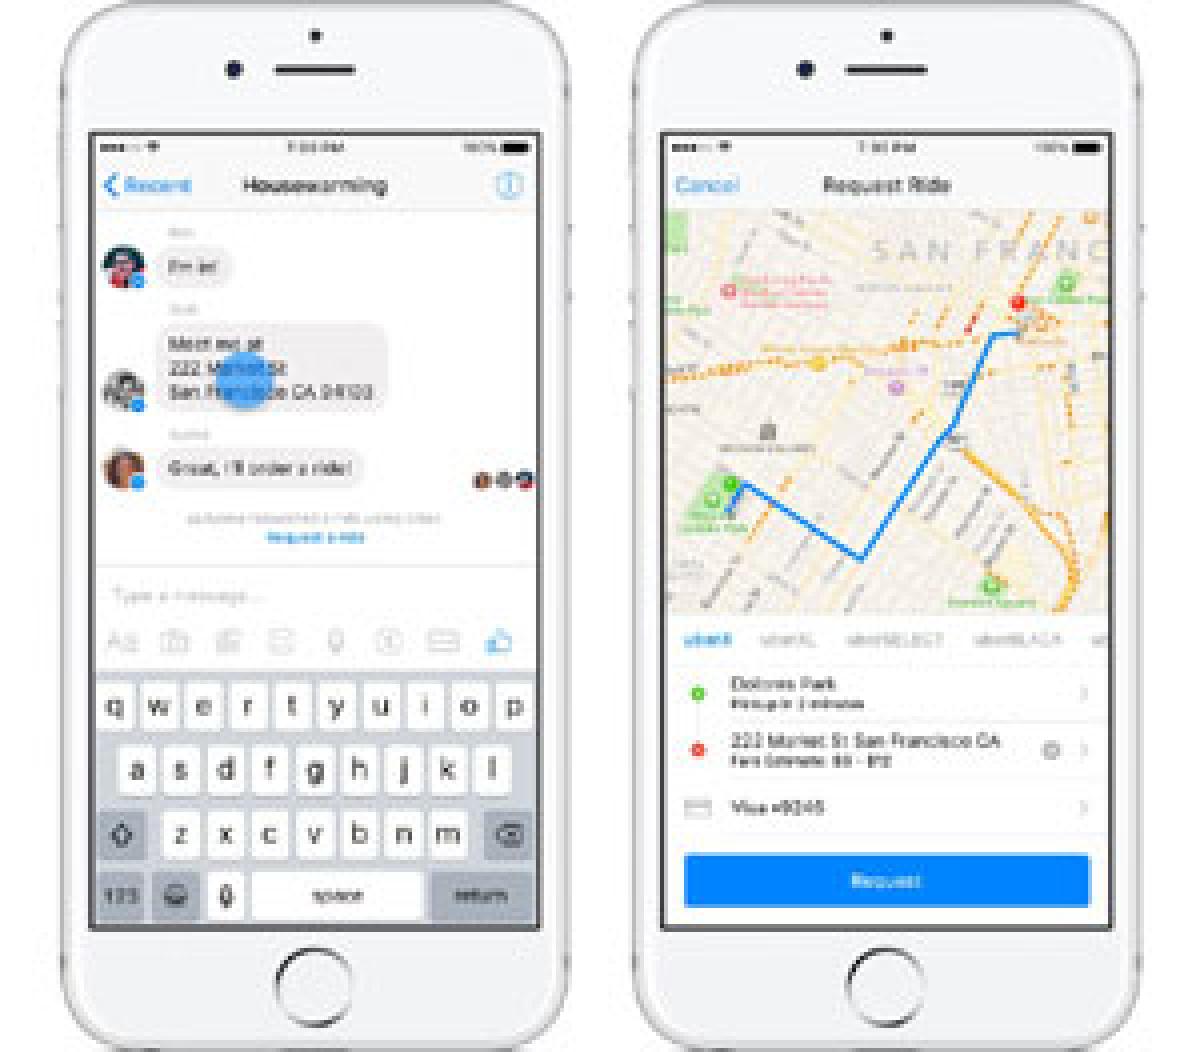 Now request a ride on Uber via Facebook Messenger